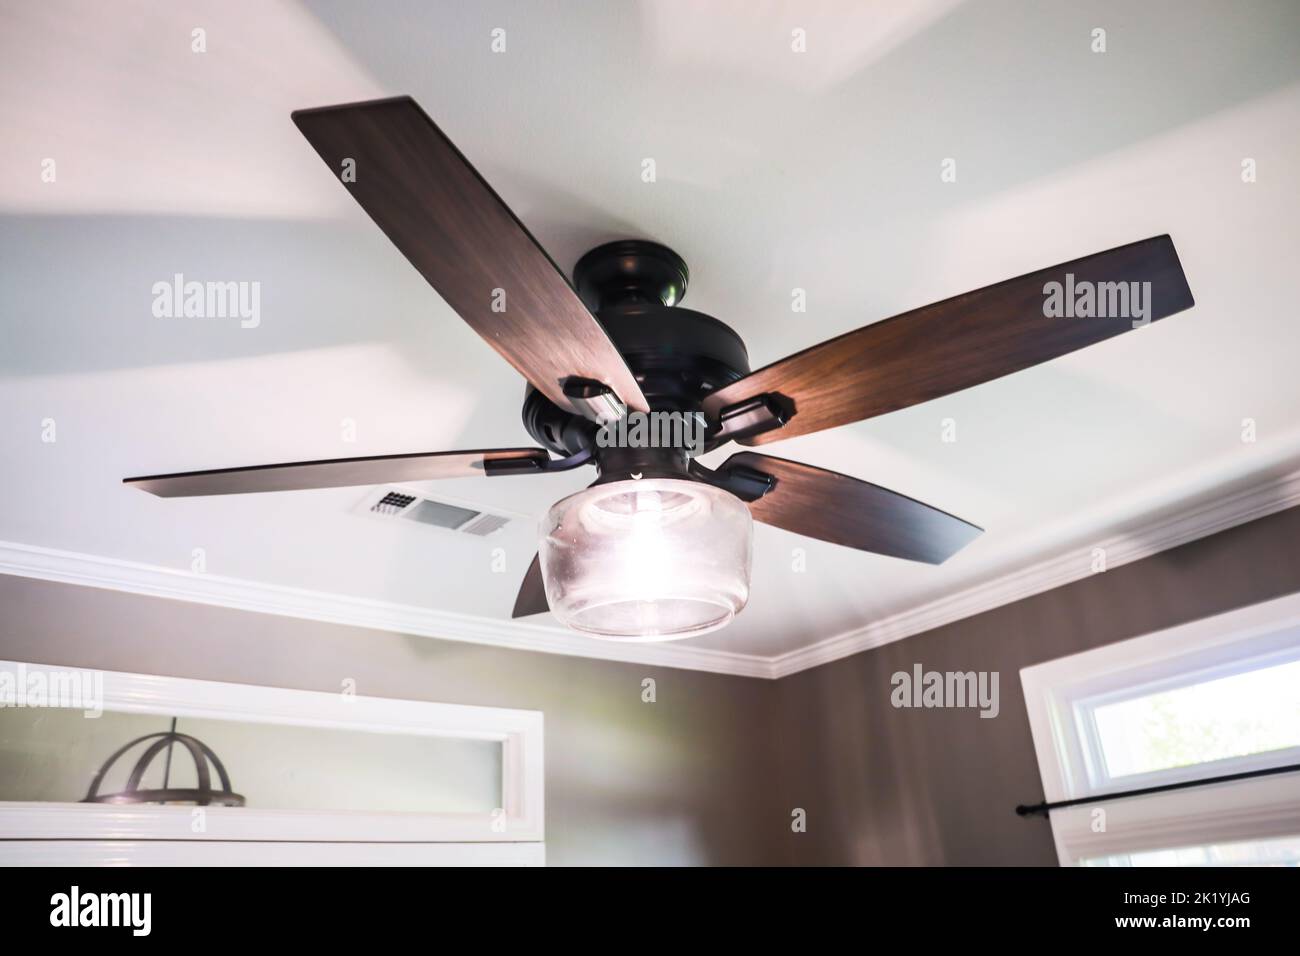 A white tray ceiling with a dark wood modern fan light and brown walls. Stock Photo